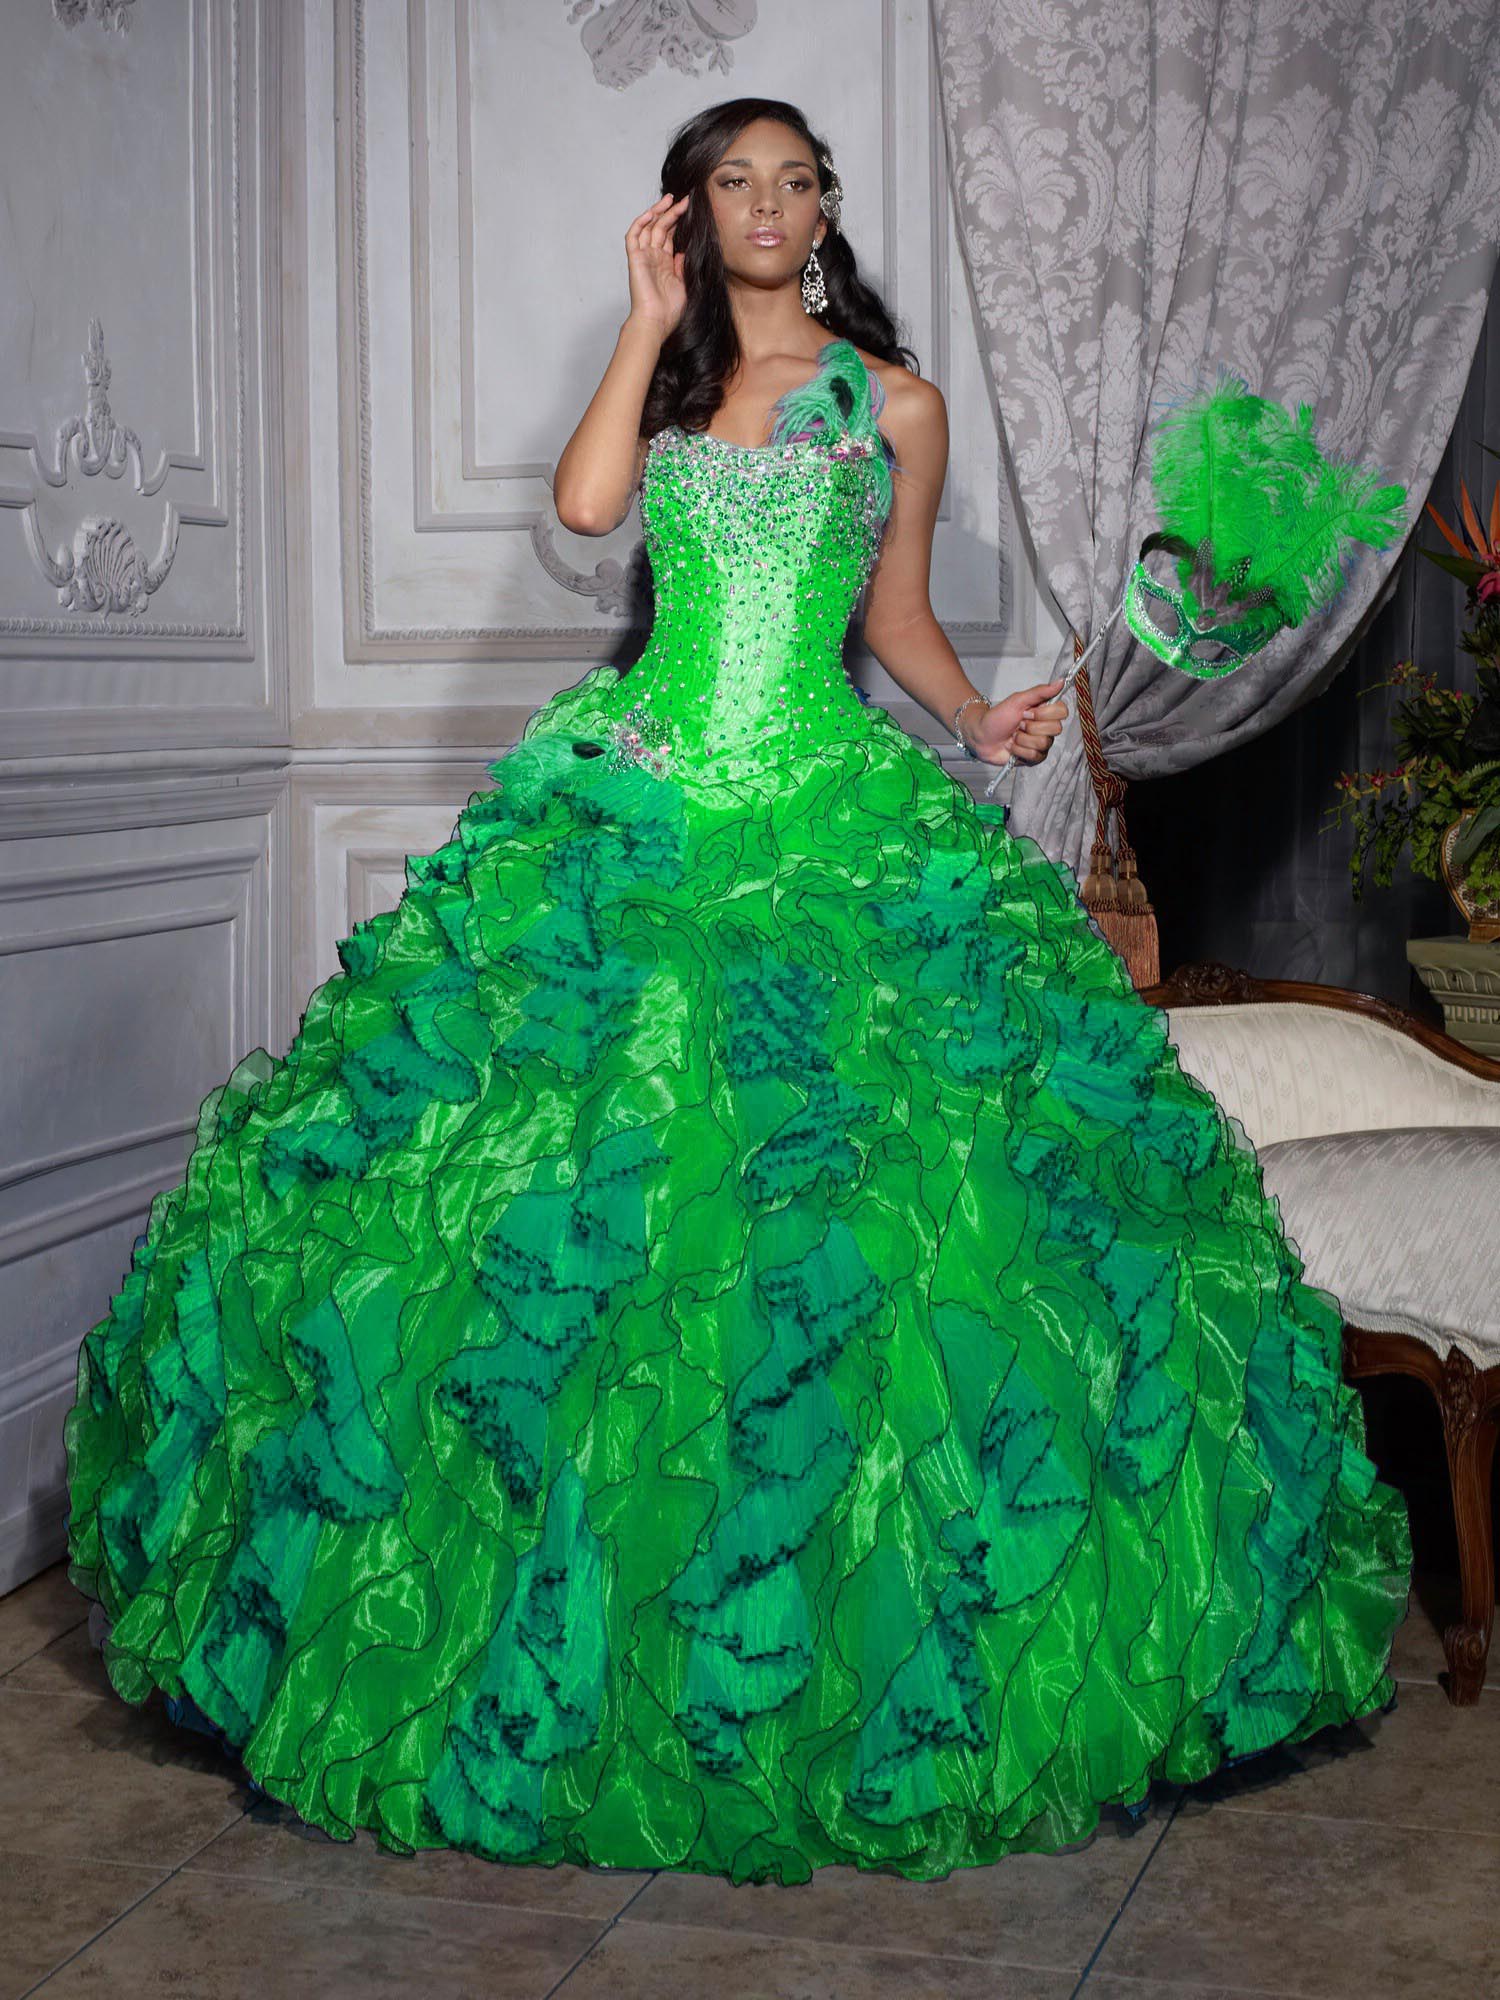 Green Quinceanera Dresses | Dressed Up Girl